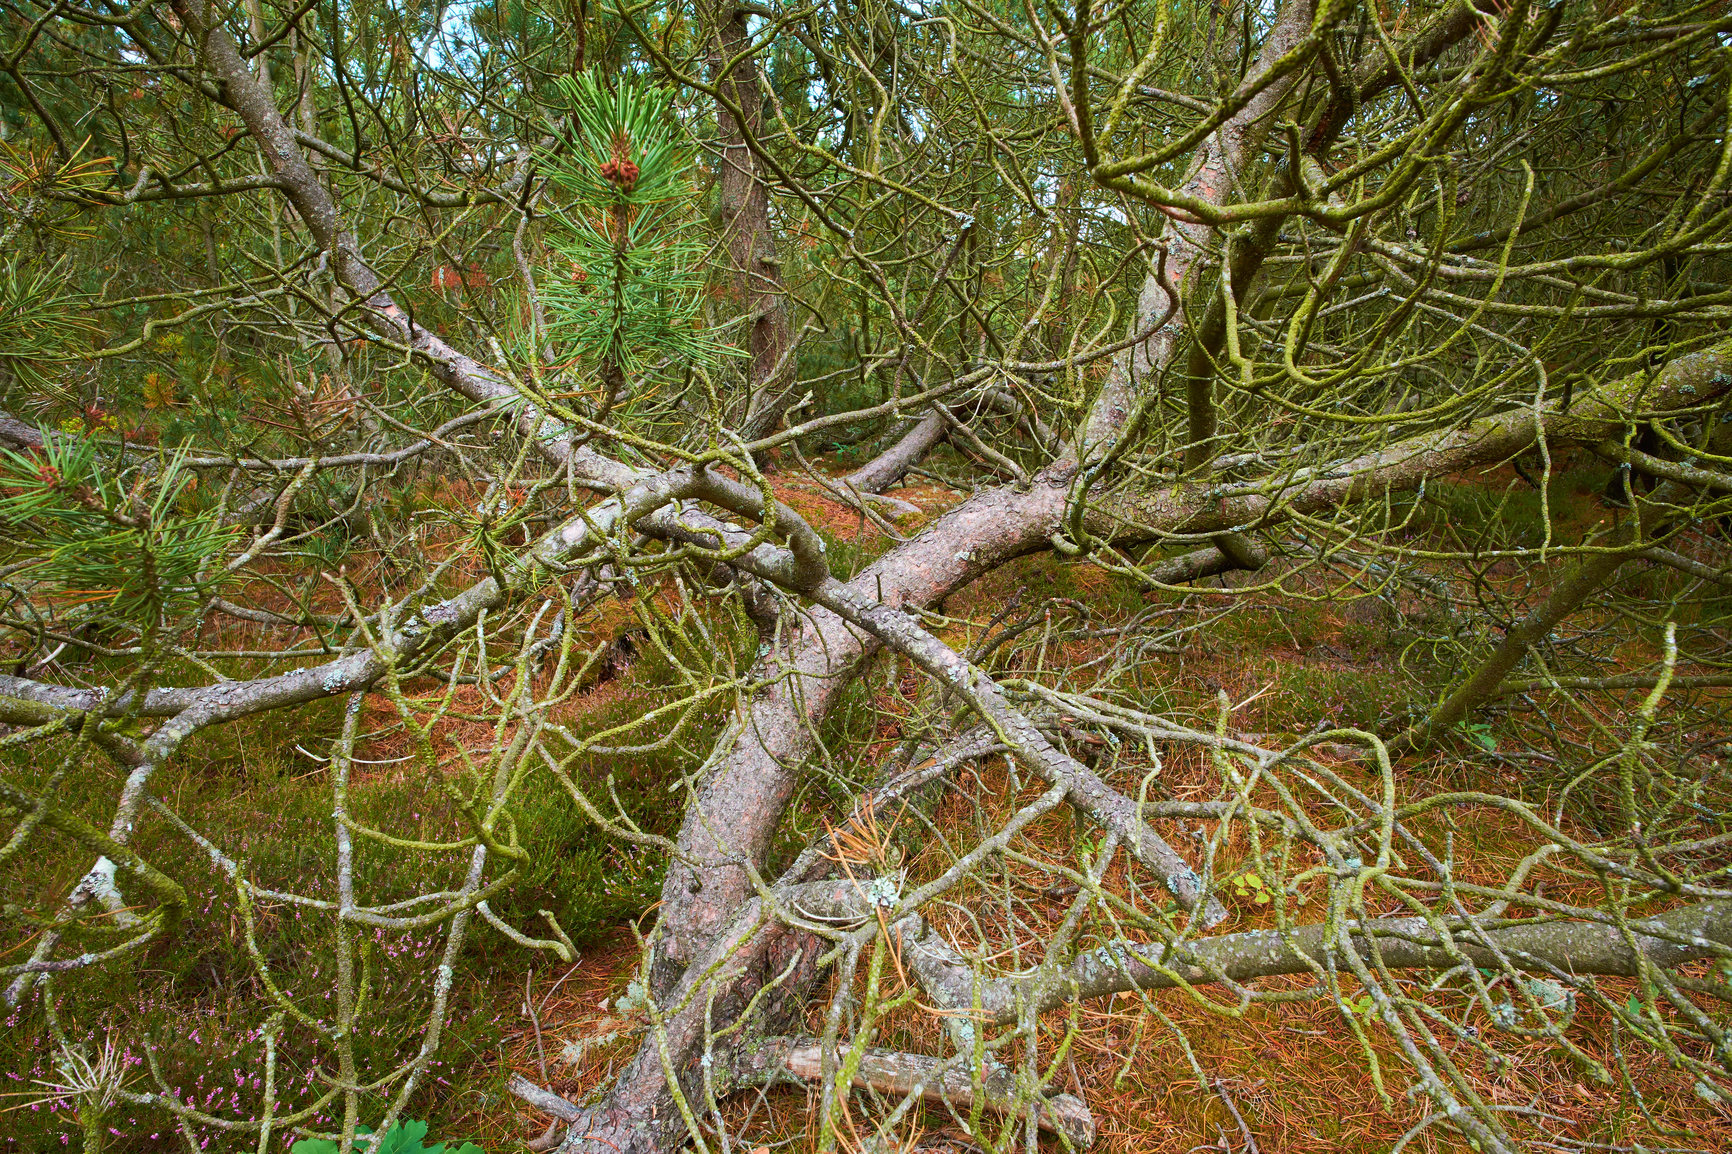 Buy stock photo View of old dry pine trees in the forest. Fallen pine trees after a storm or strong wind leaning and damaged. Green moss or algae growing on tree trunks in a remote nature landscape in Denmark